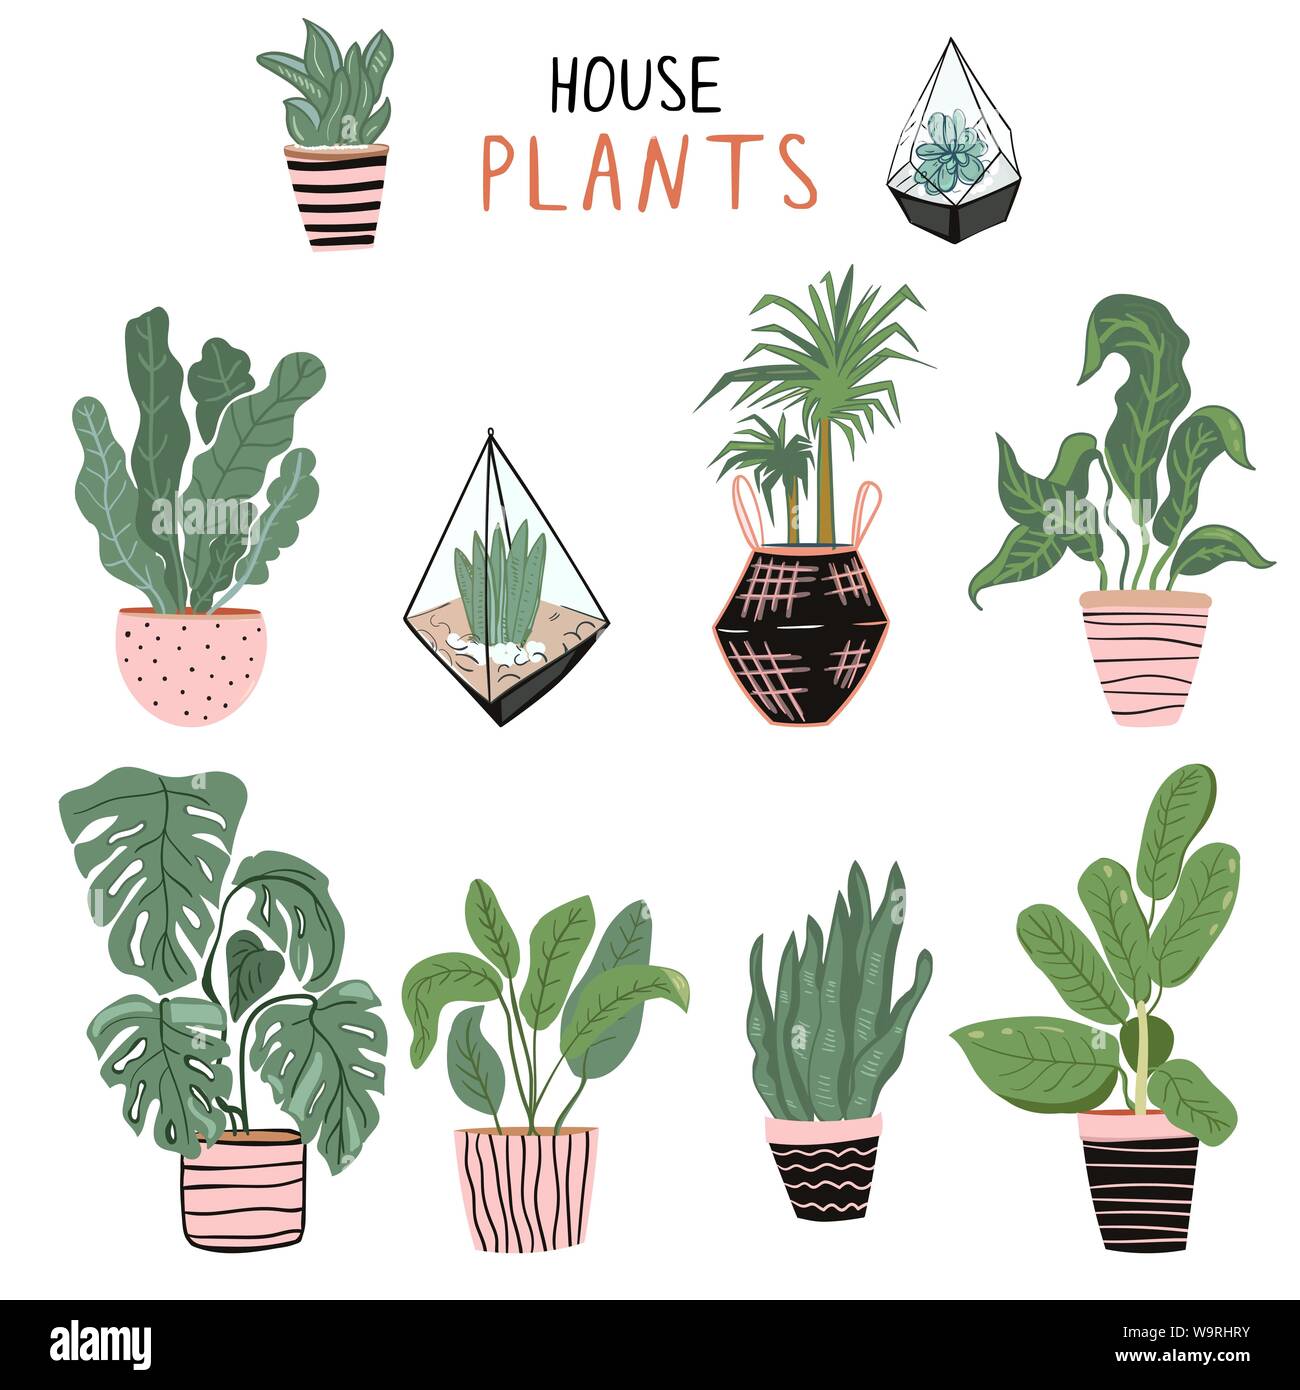 Set of different house plants Stock Vector